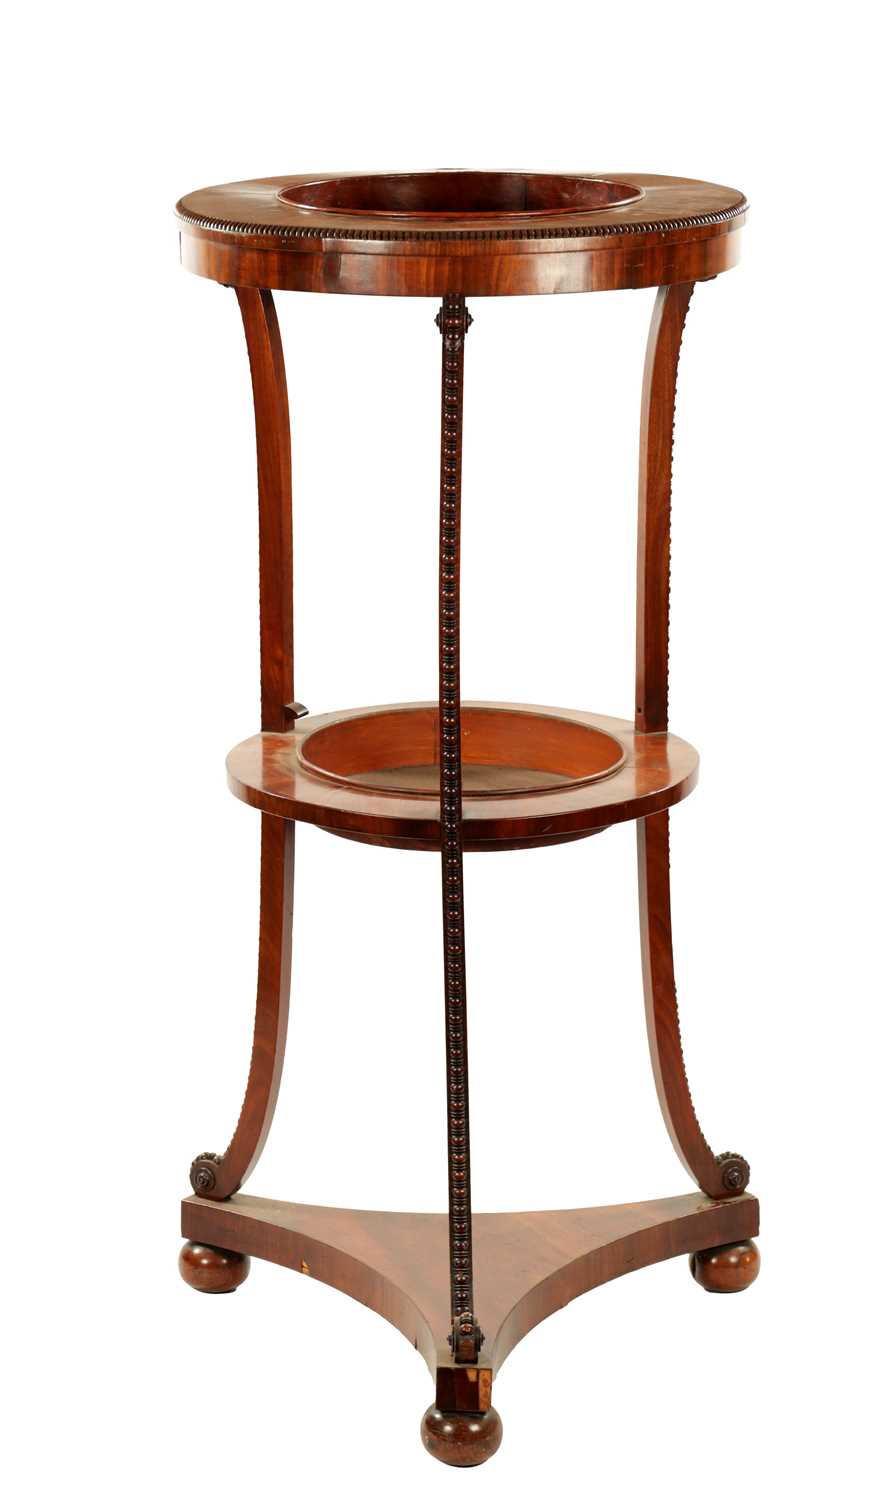 Lot 303 - A REGENCY TWO TIER MAHOGANY JARDINIERE STAND WITH BEADED DECORATION